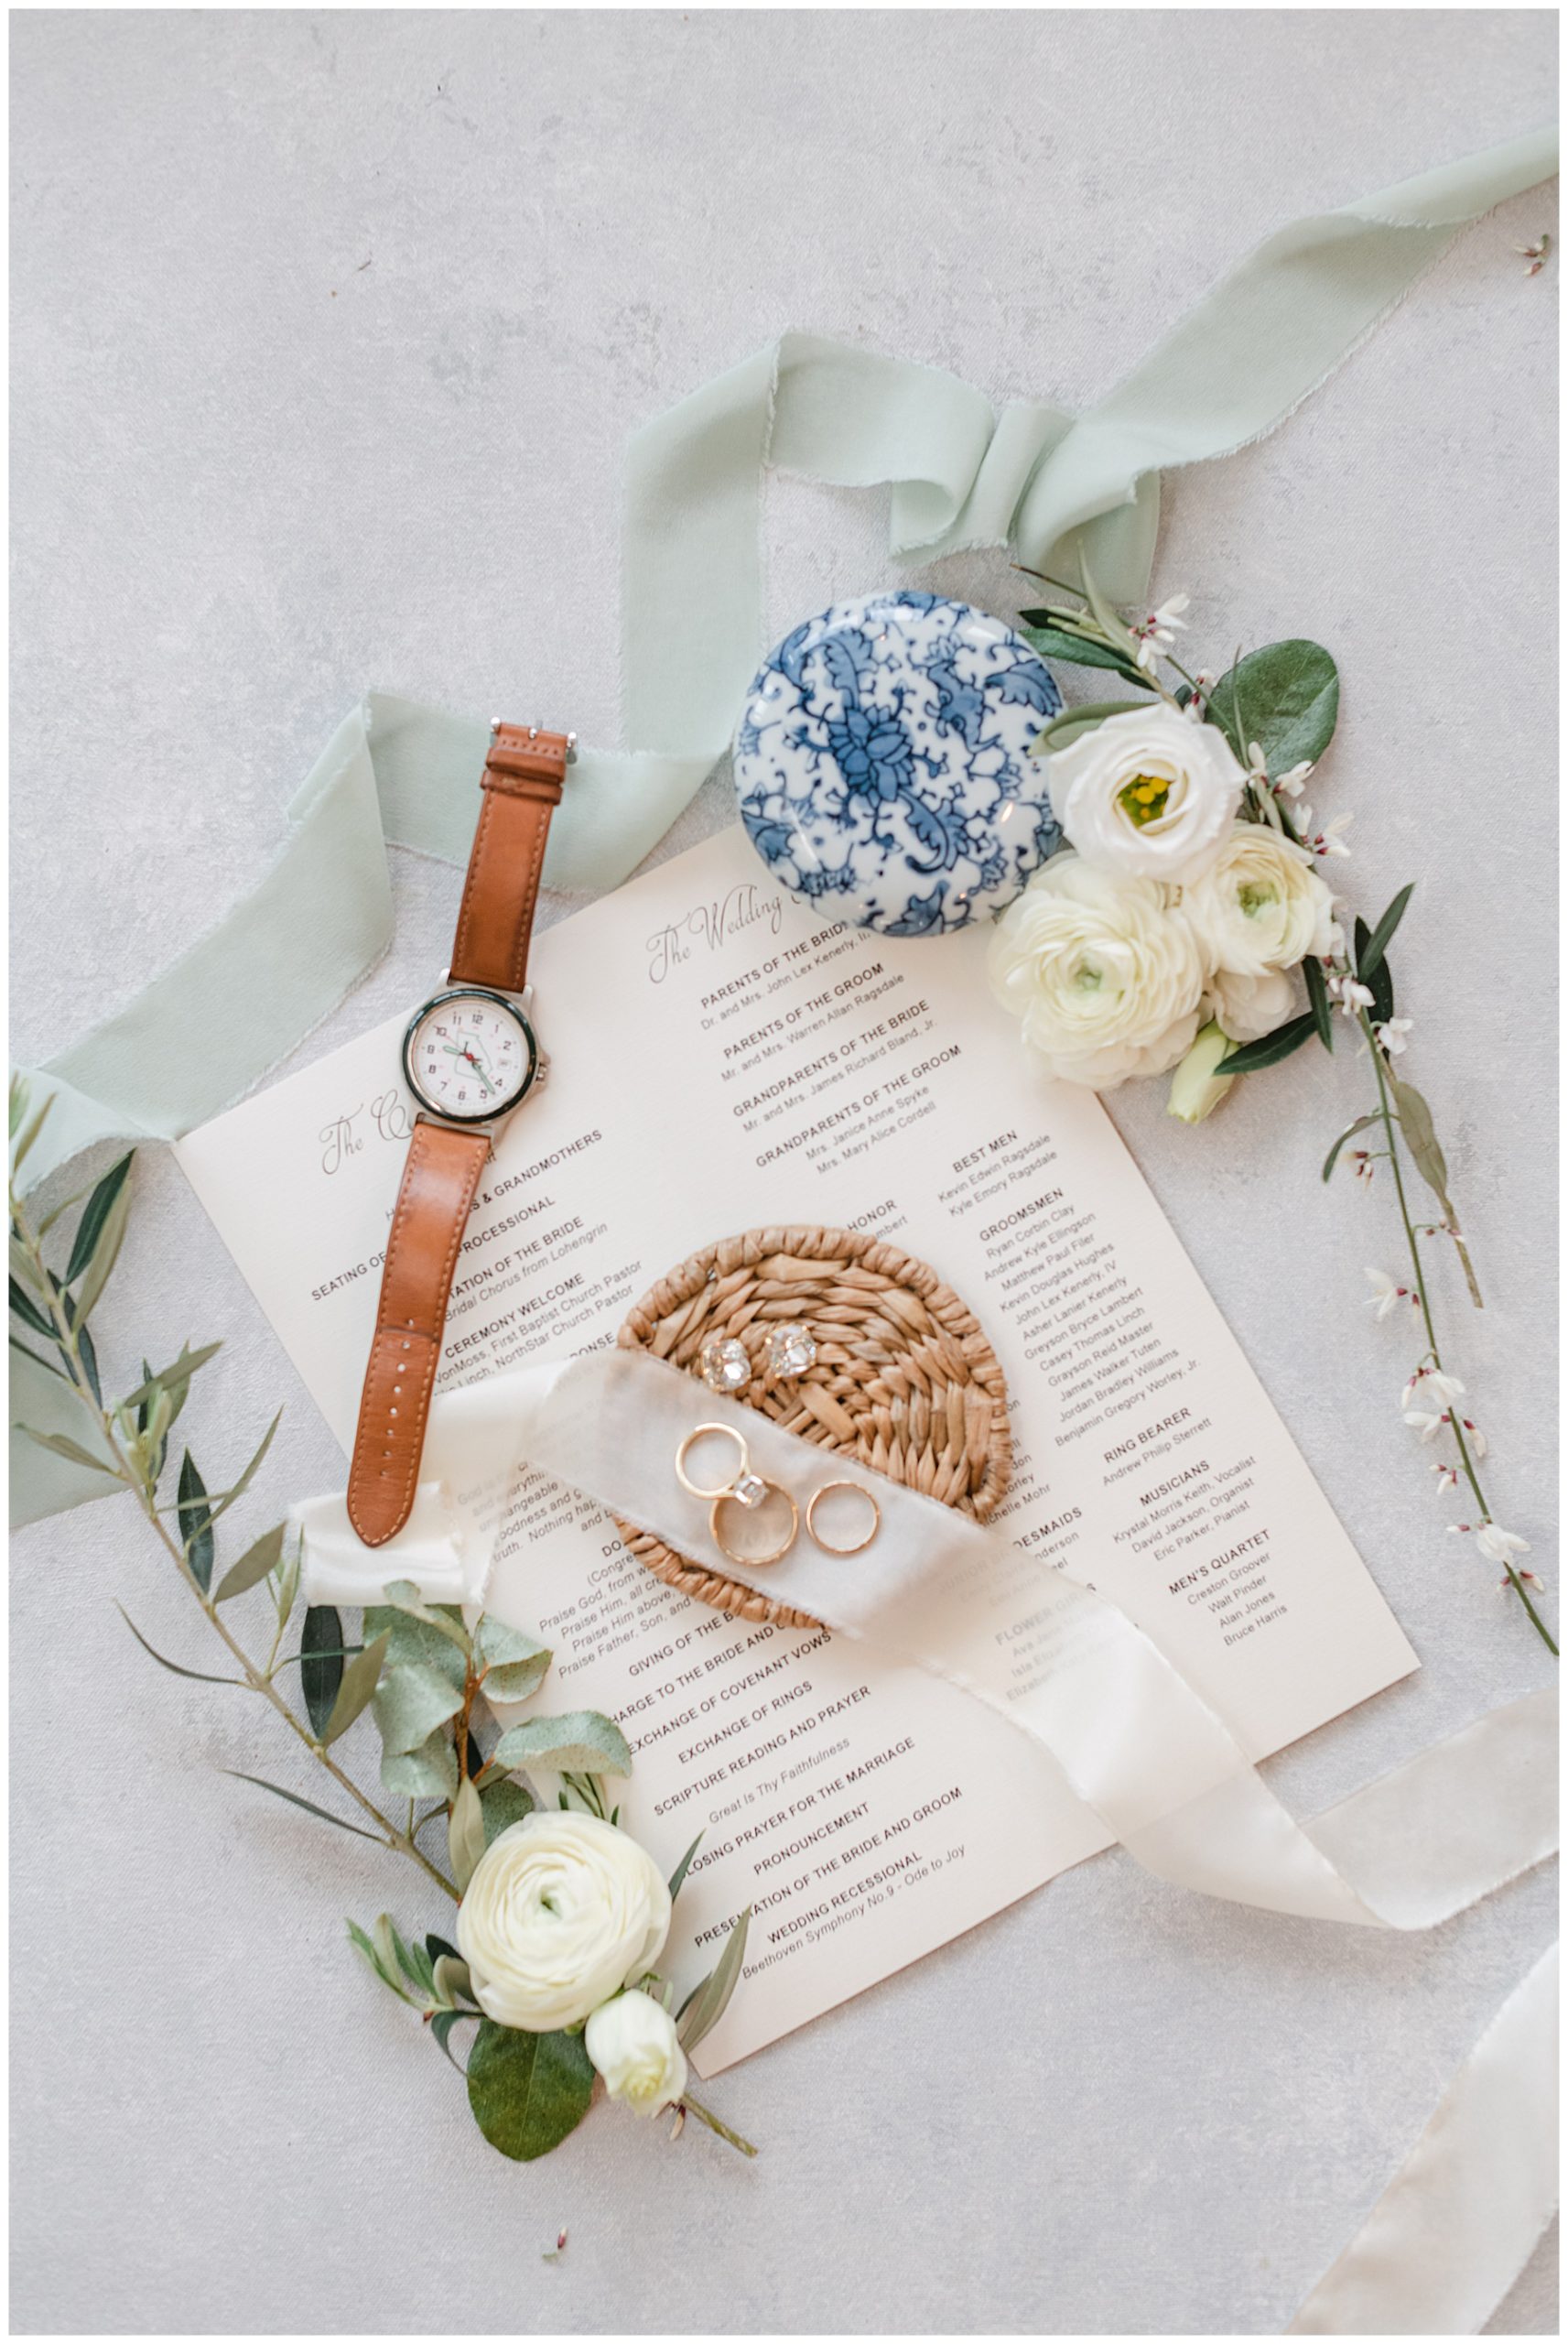 Grooms watch and rings at estate wedding